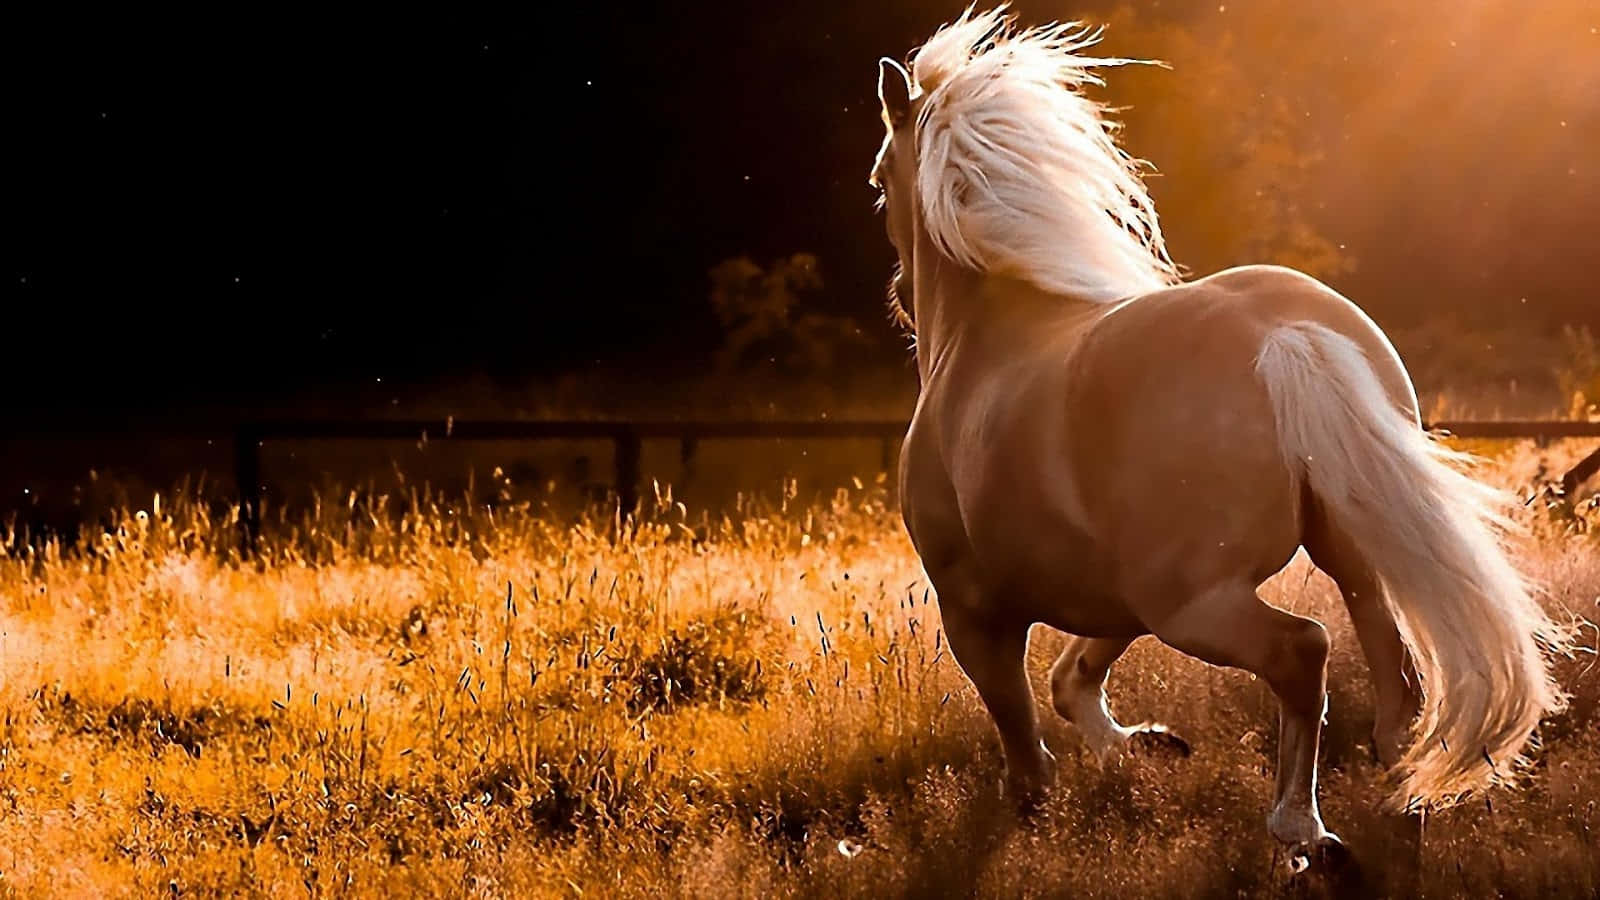 Enjoy the beauty of nature with a majestic pretty horse